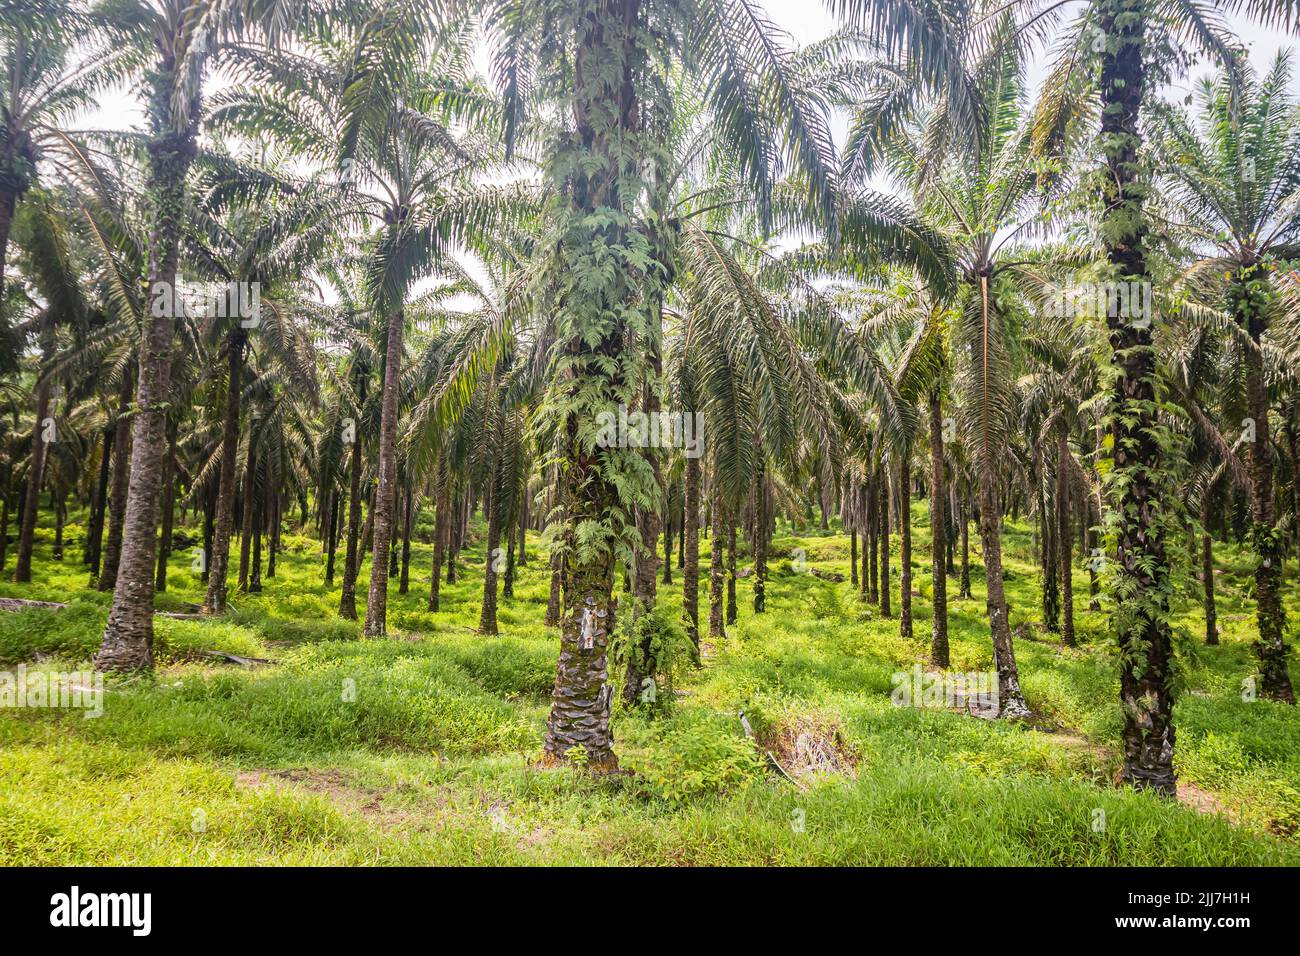 Row of palm oil trees at palm oil plantation in Terengganu, Malaysia. Stock Photo